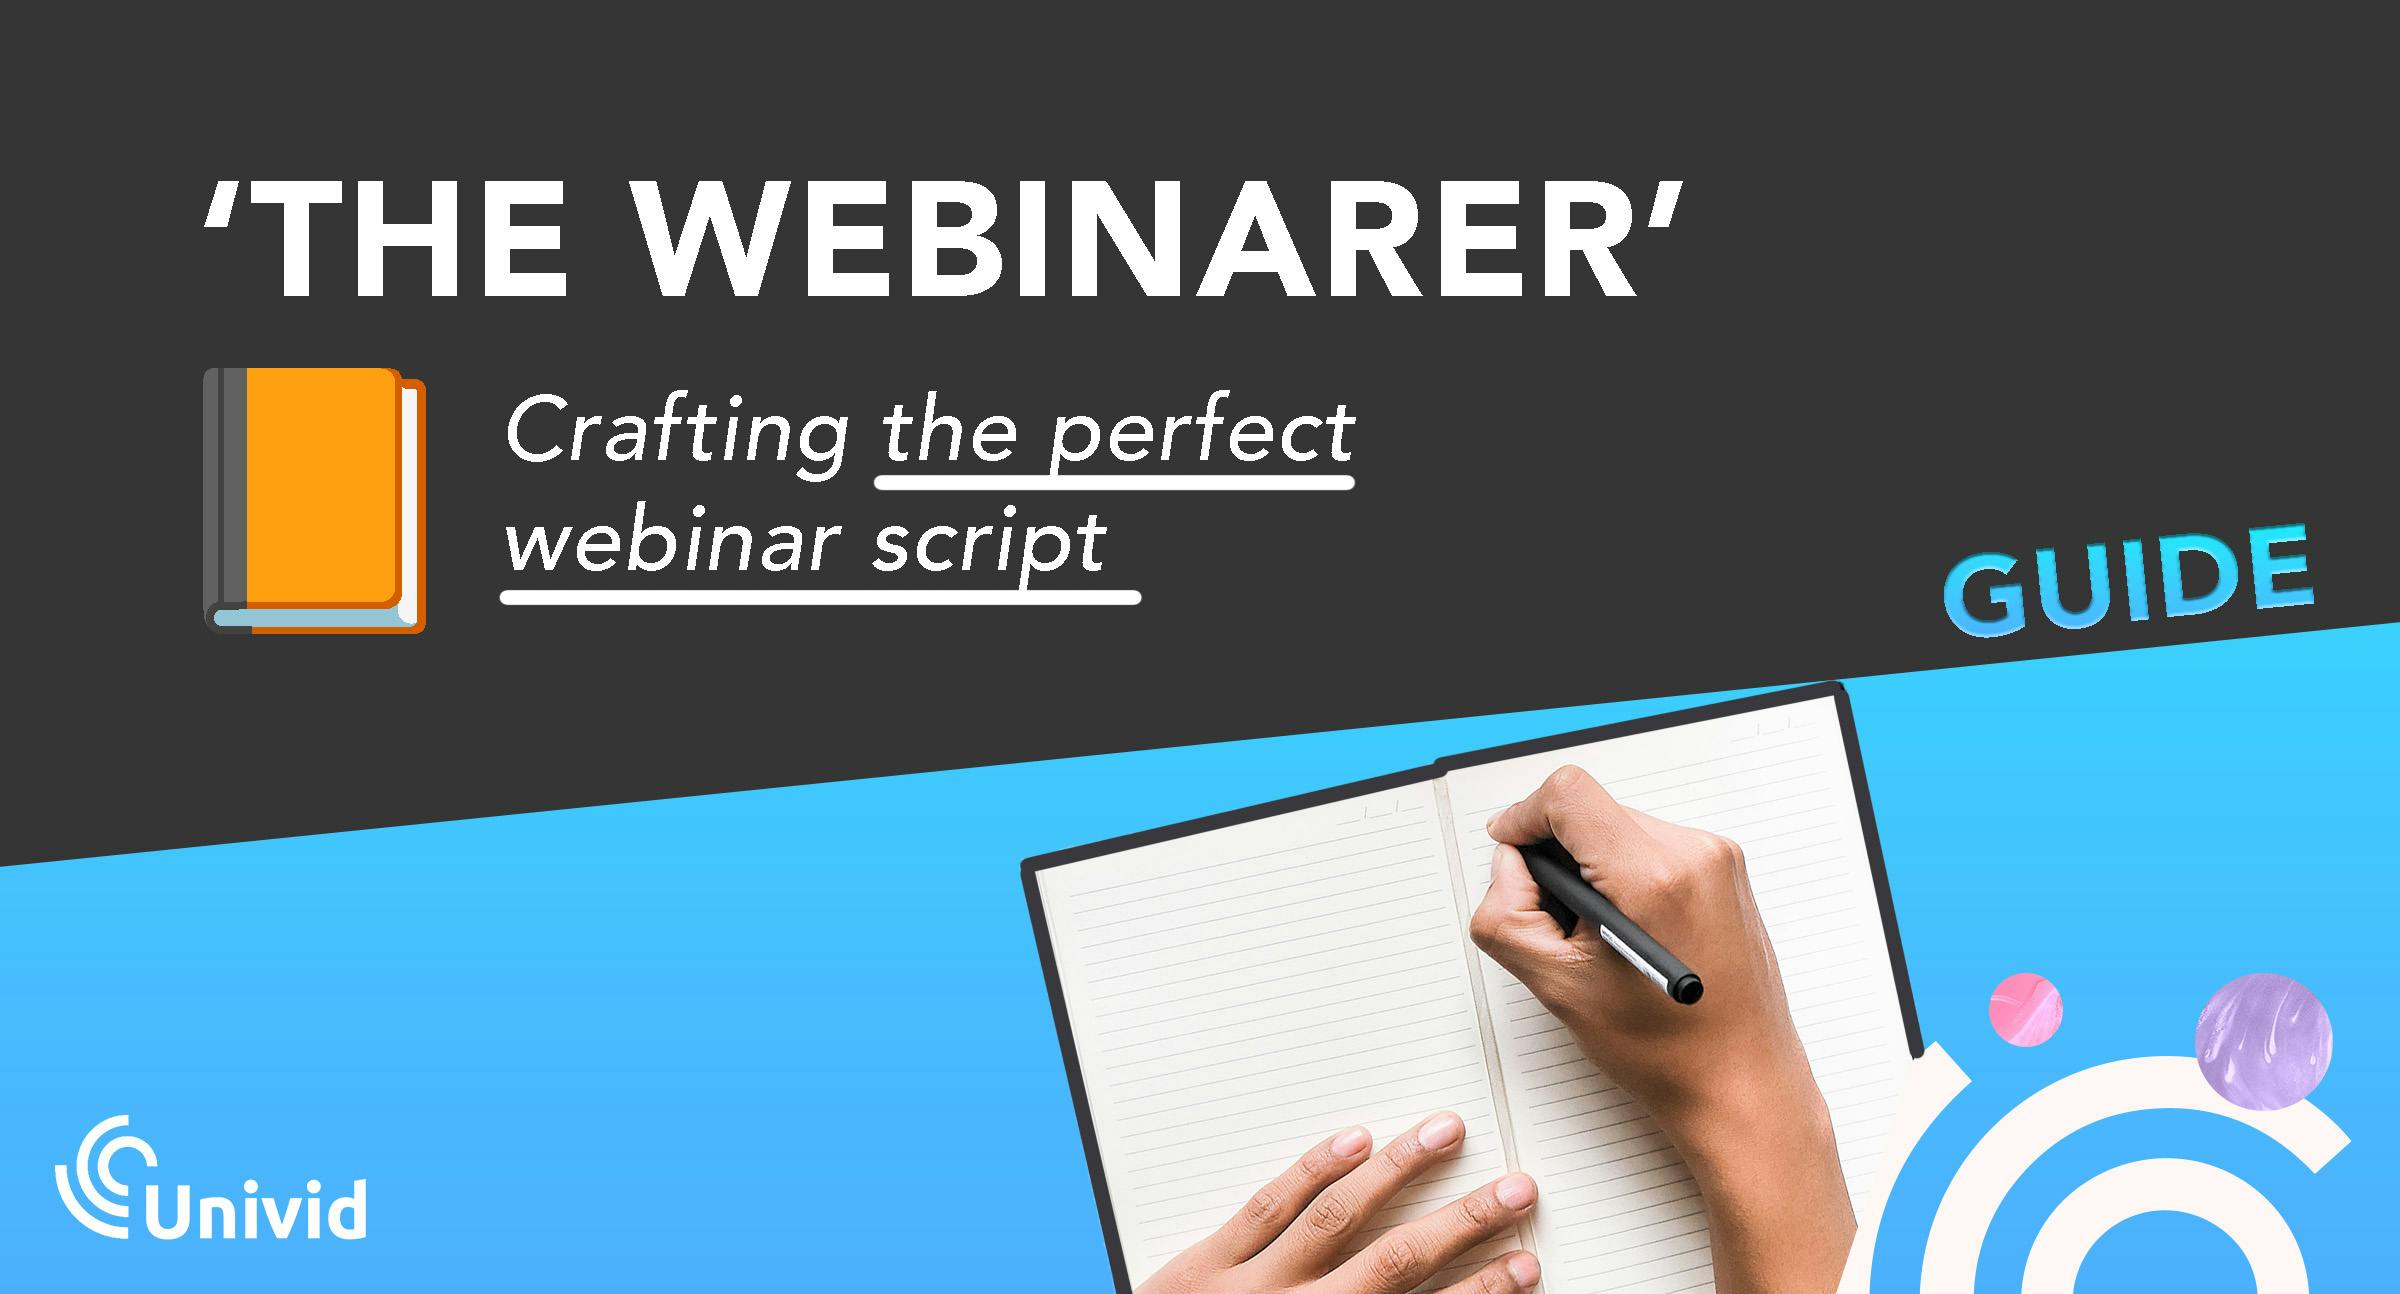 The Webinarer is the ultimate guide for webinar hosts to write the perfect webinar script in 5 steps. Learn how to craft templates like a superstar, and deliver the perfect experience.